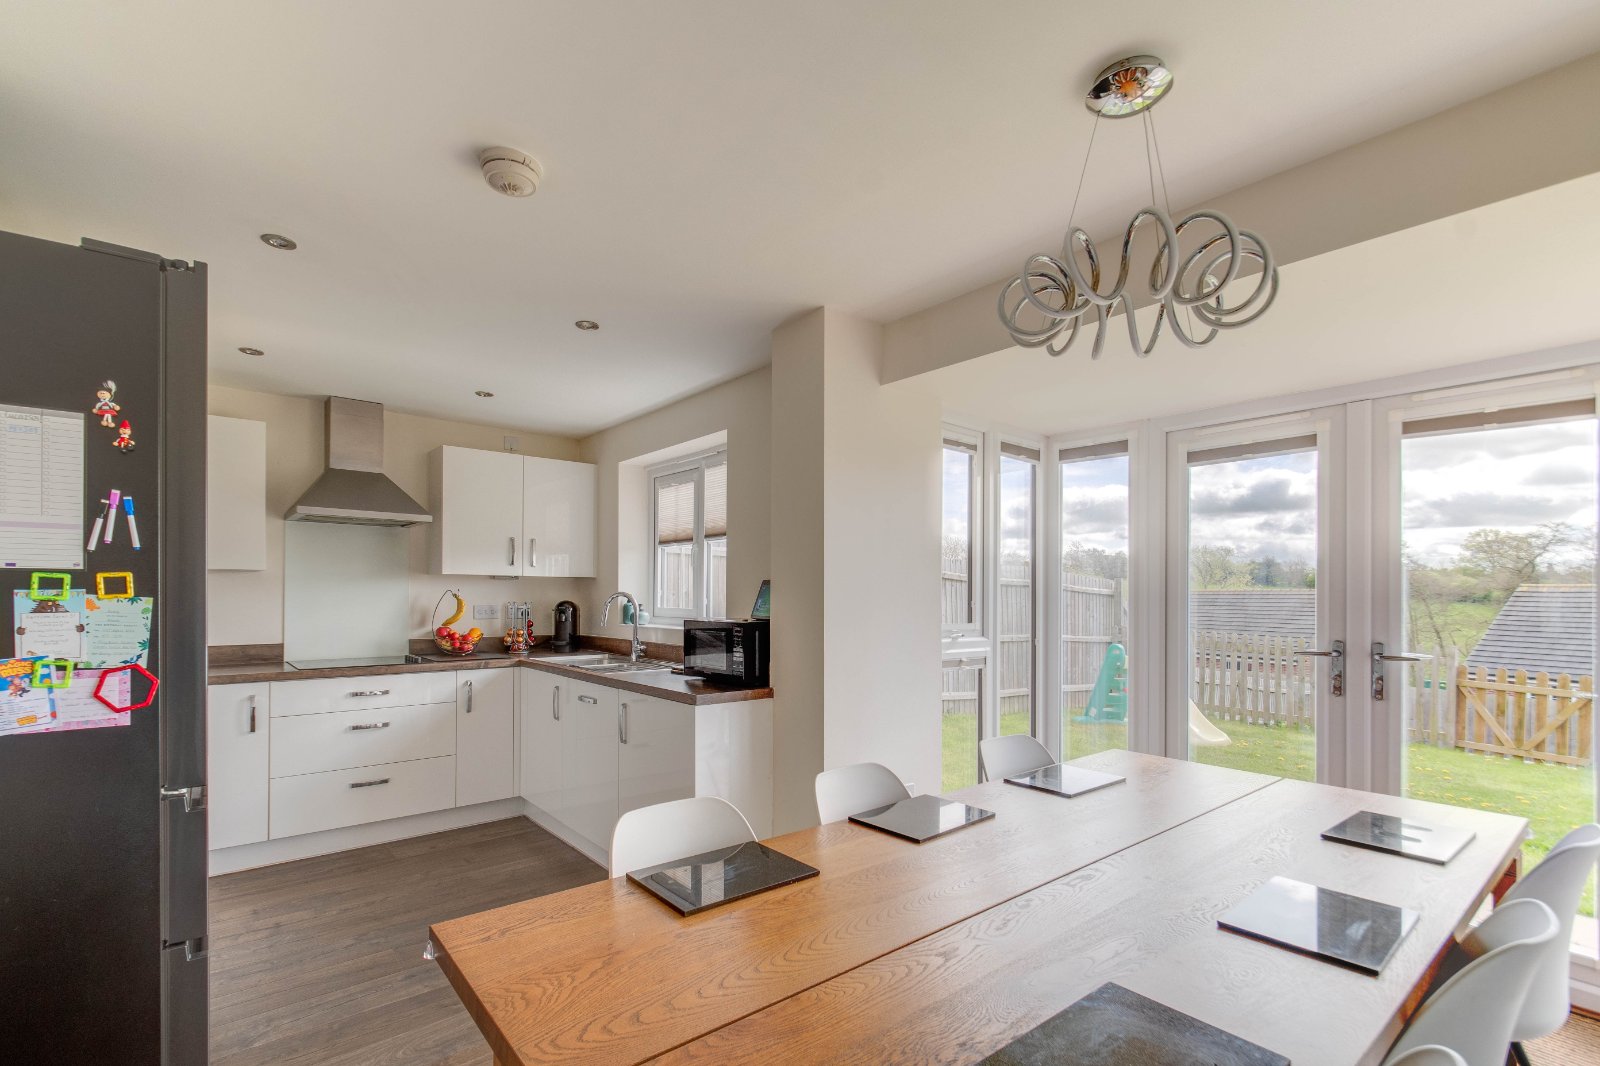 4 bed house for sale in Faxfleet Street, Webheath  - Property Image 3